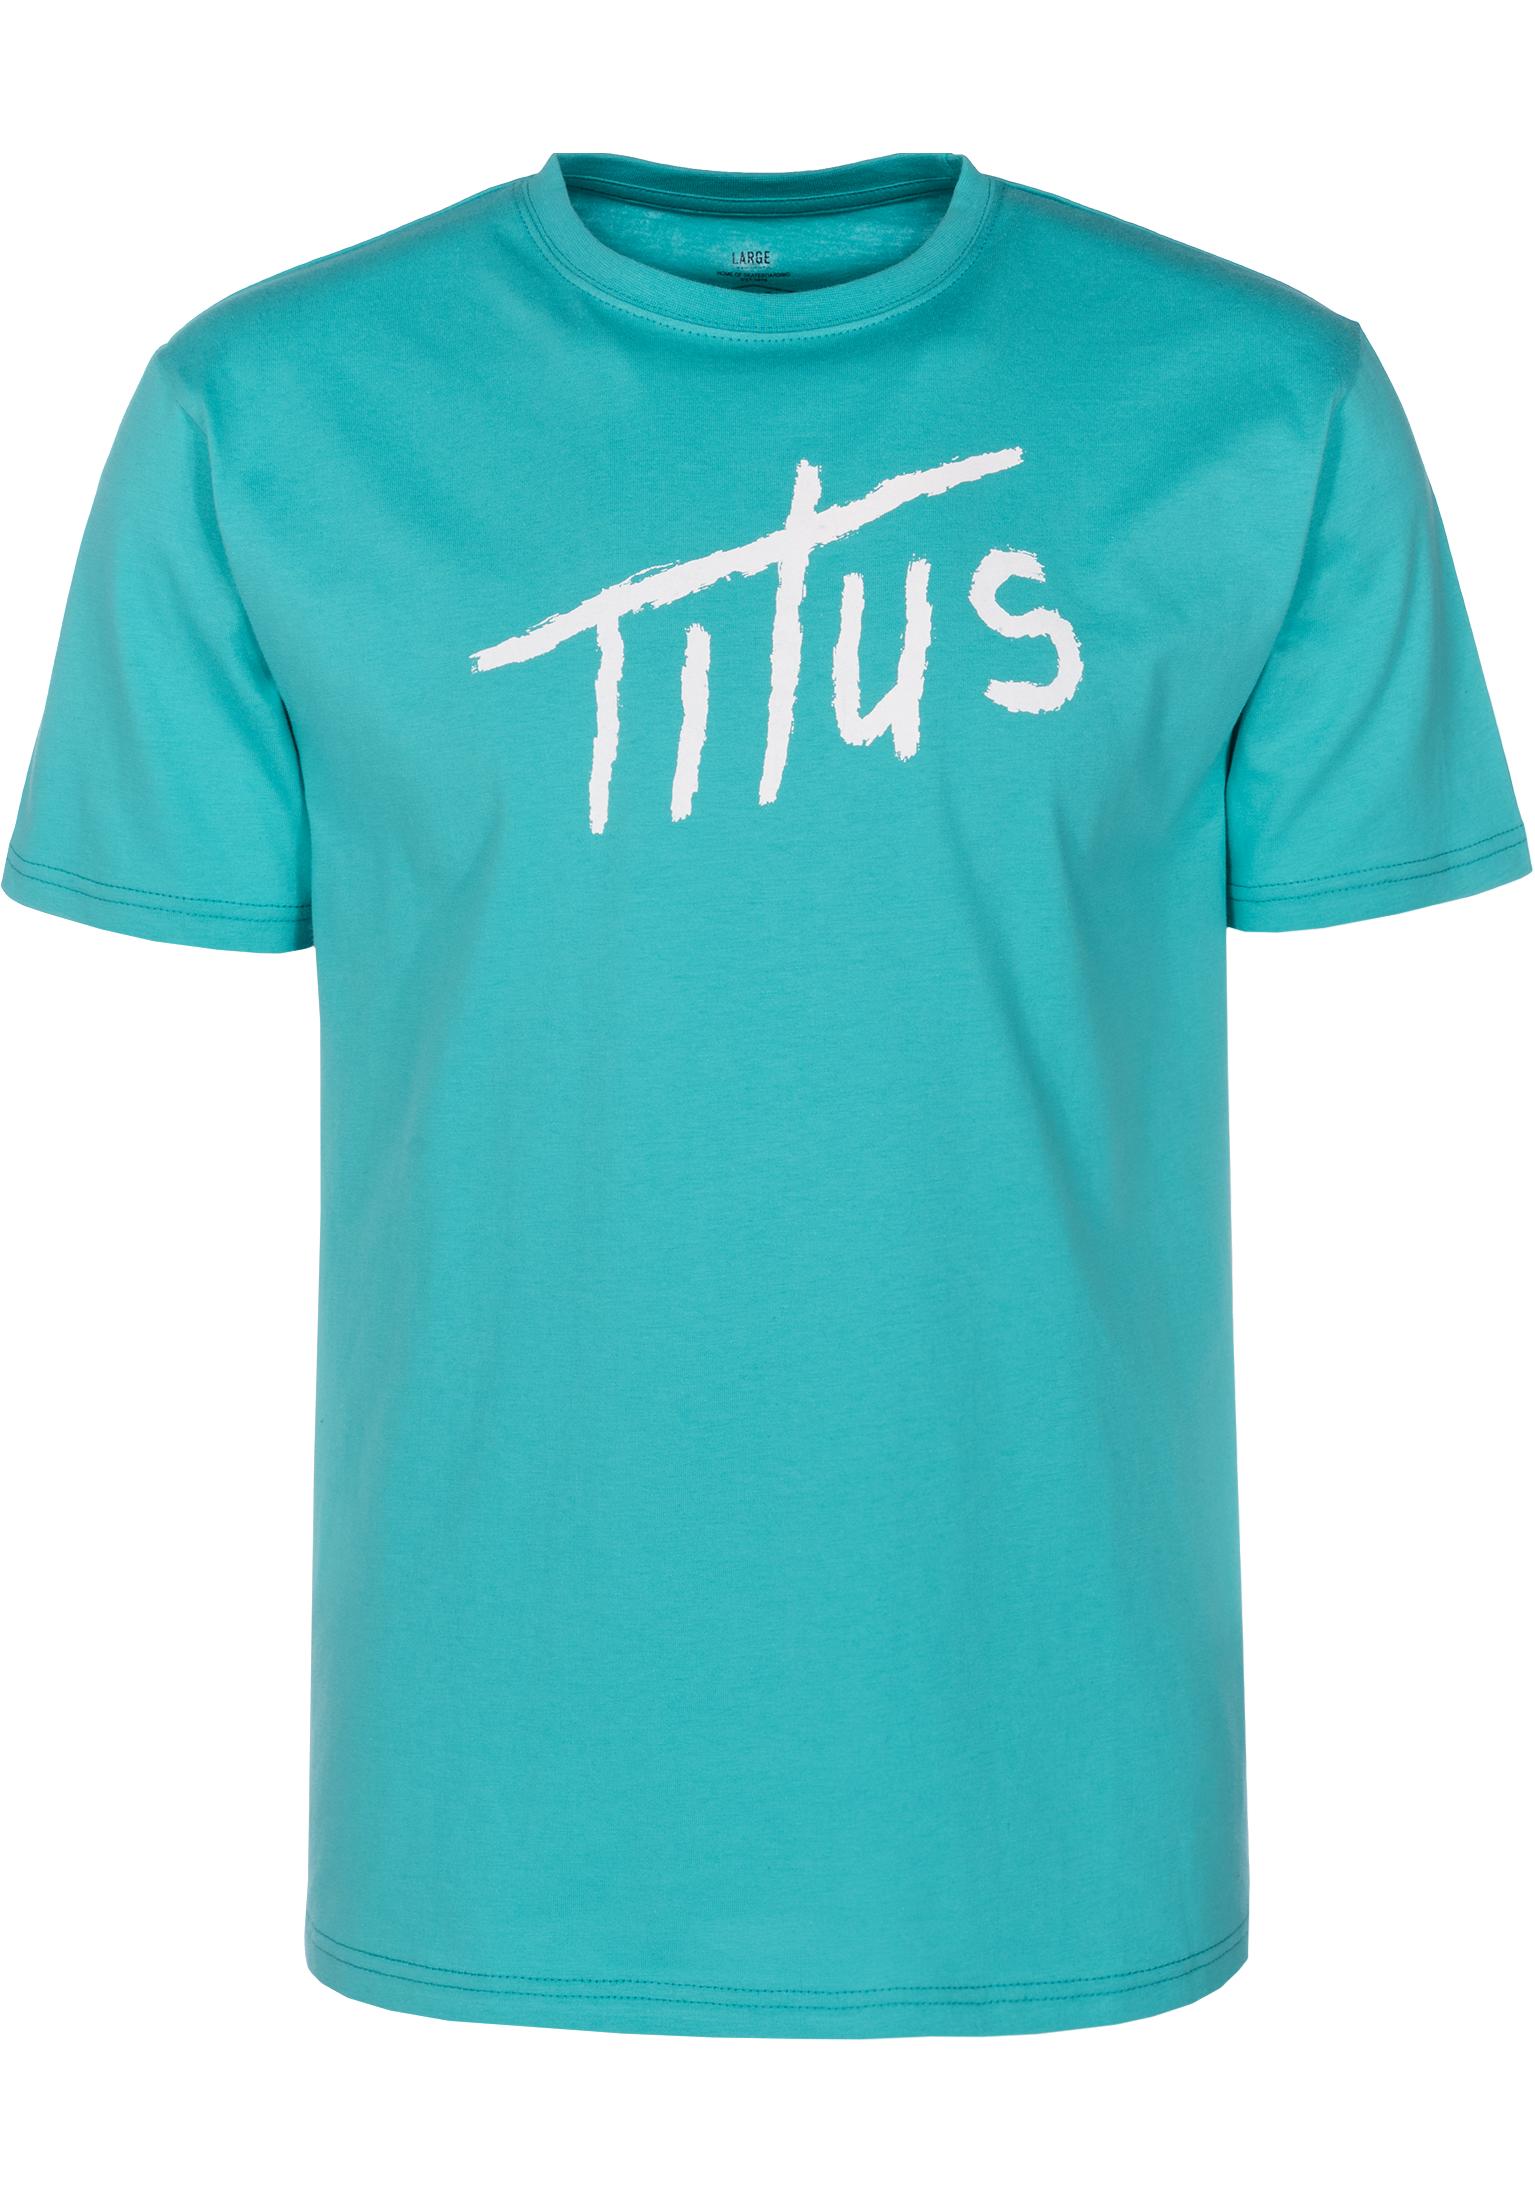 Titus_Aachent-shirts-brushed-letters-mint-green-vorderansicht-0397376.jpg